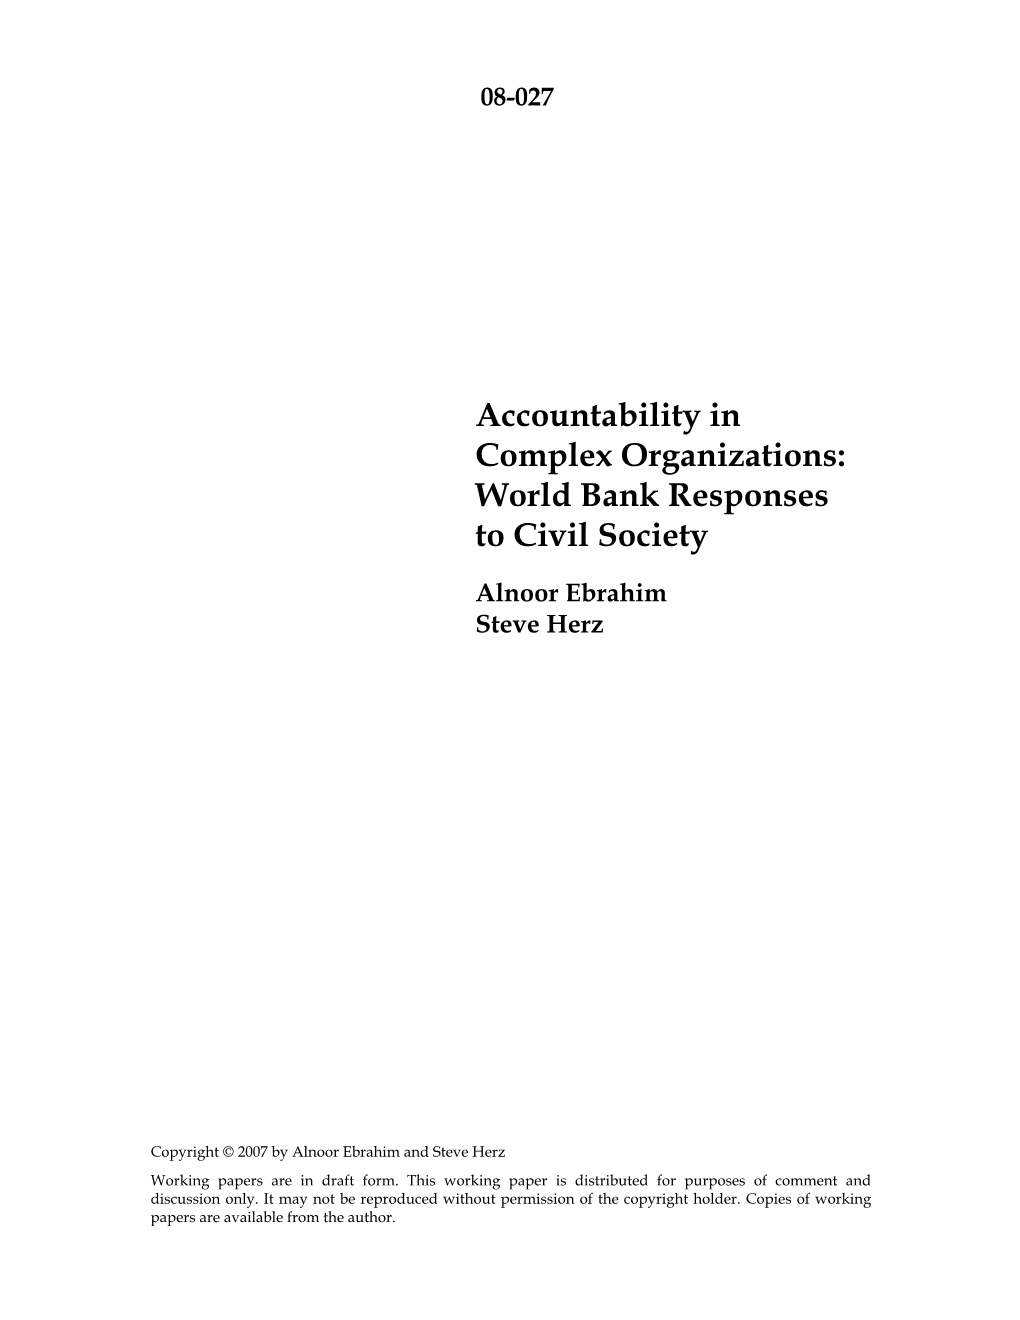 Accountability in Complex Organizations: World Bank Responses to Civil Society